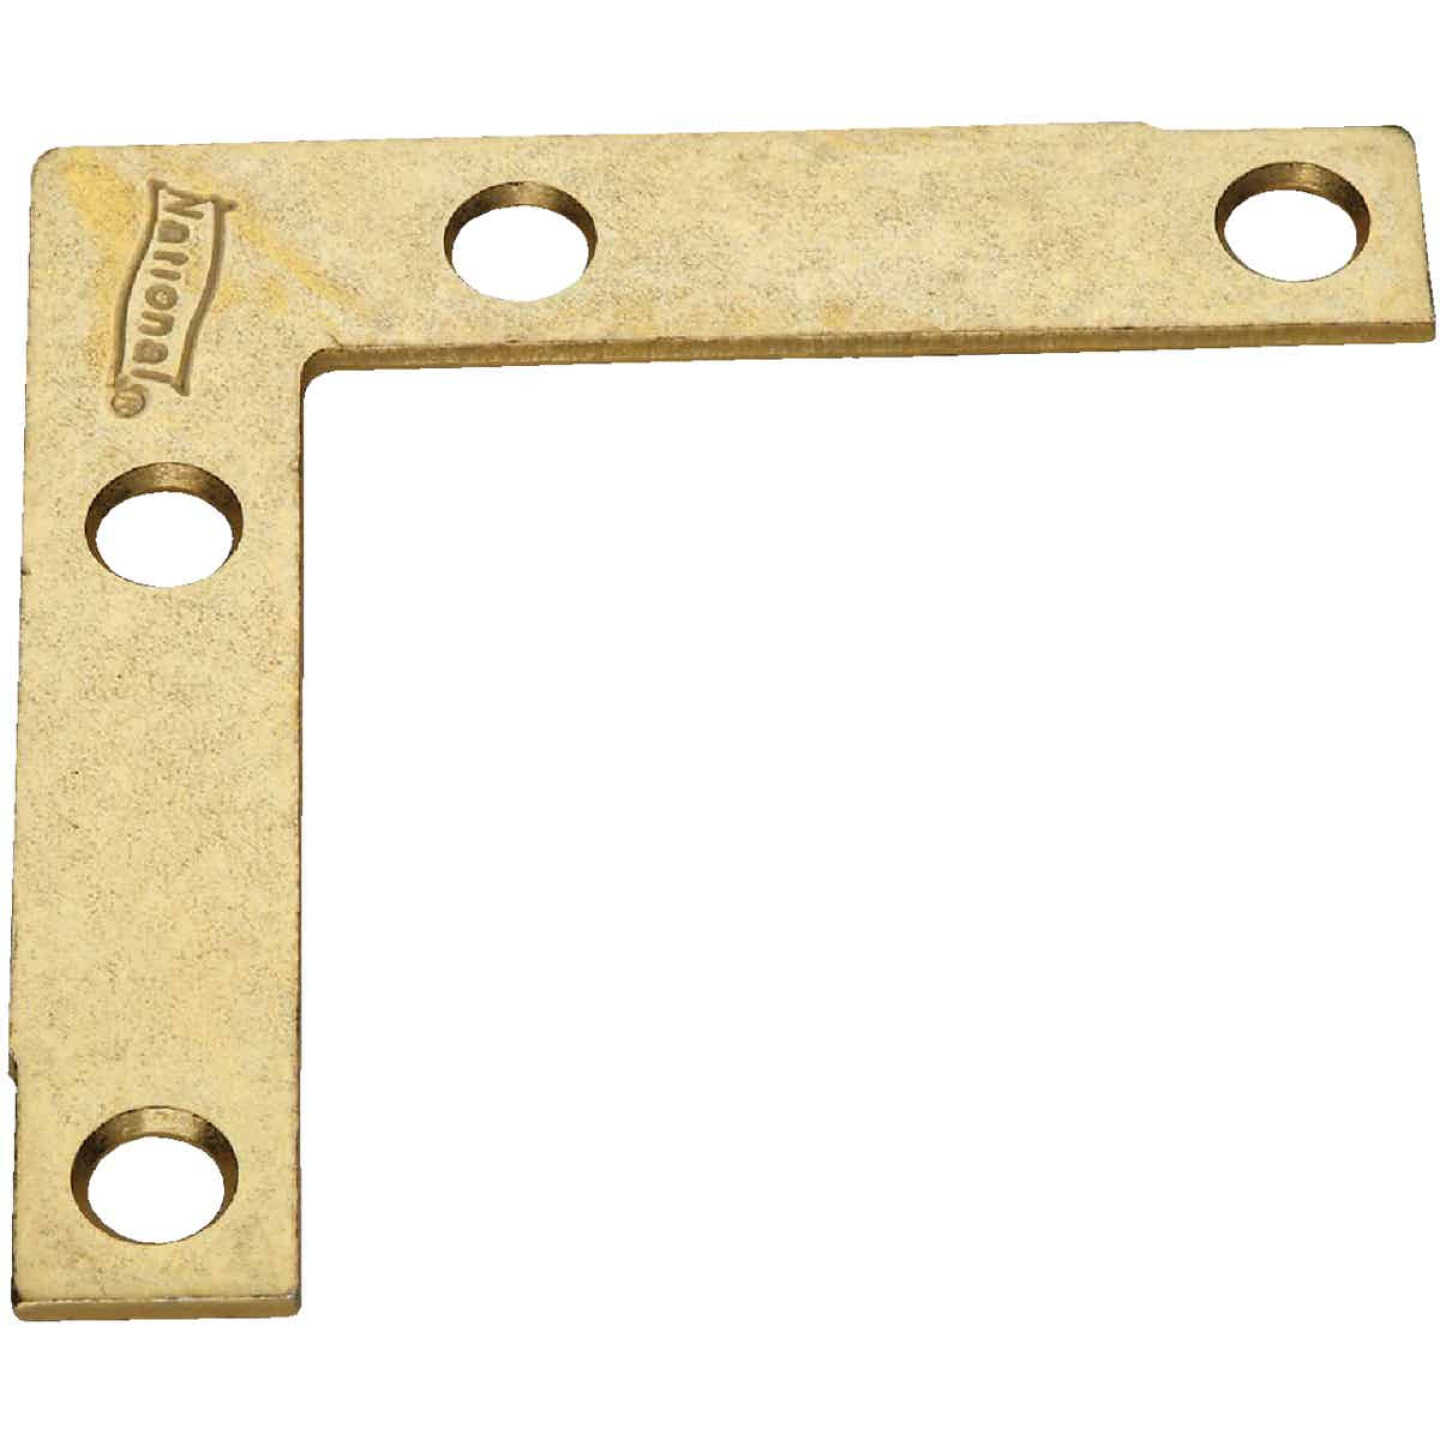 National Catalog 117 2-1/2 In. x 3/8 In. Brass Flat Corner Iron (4-Count) Image 1